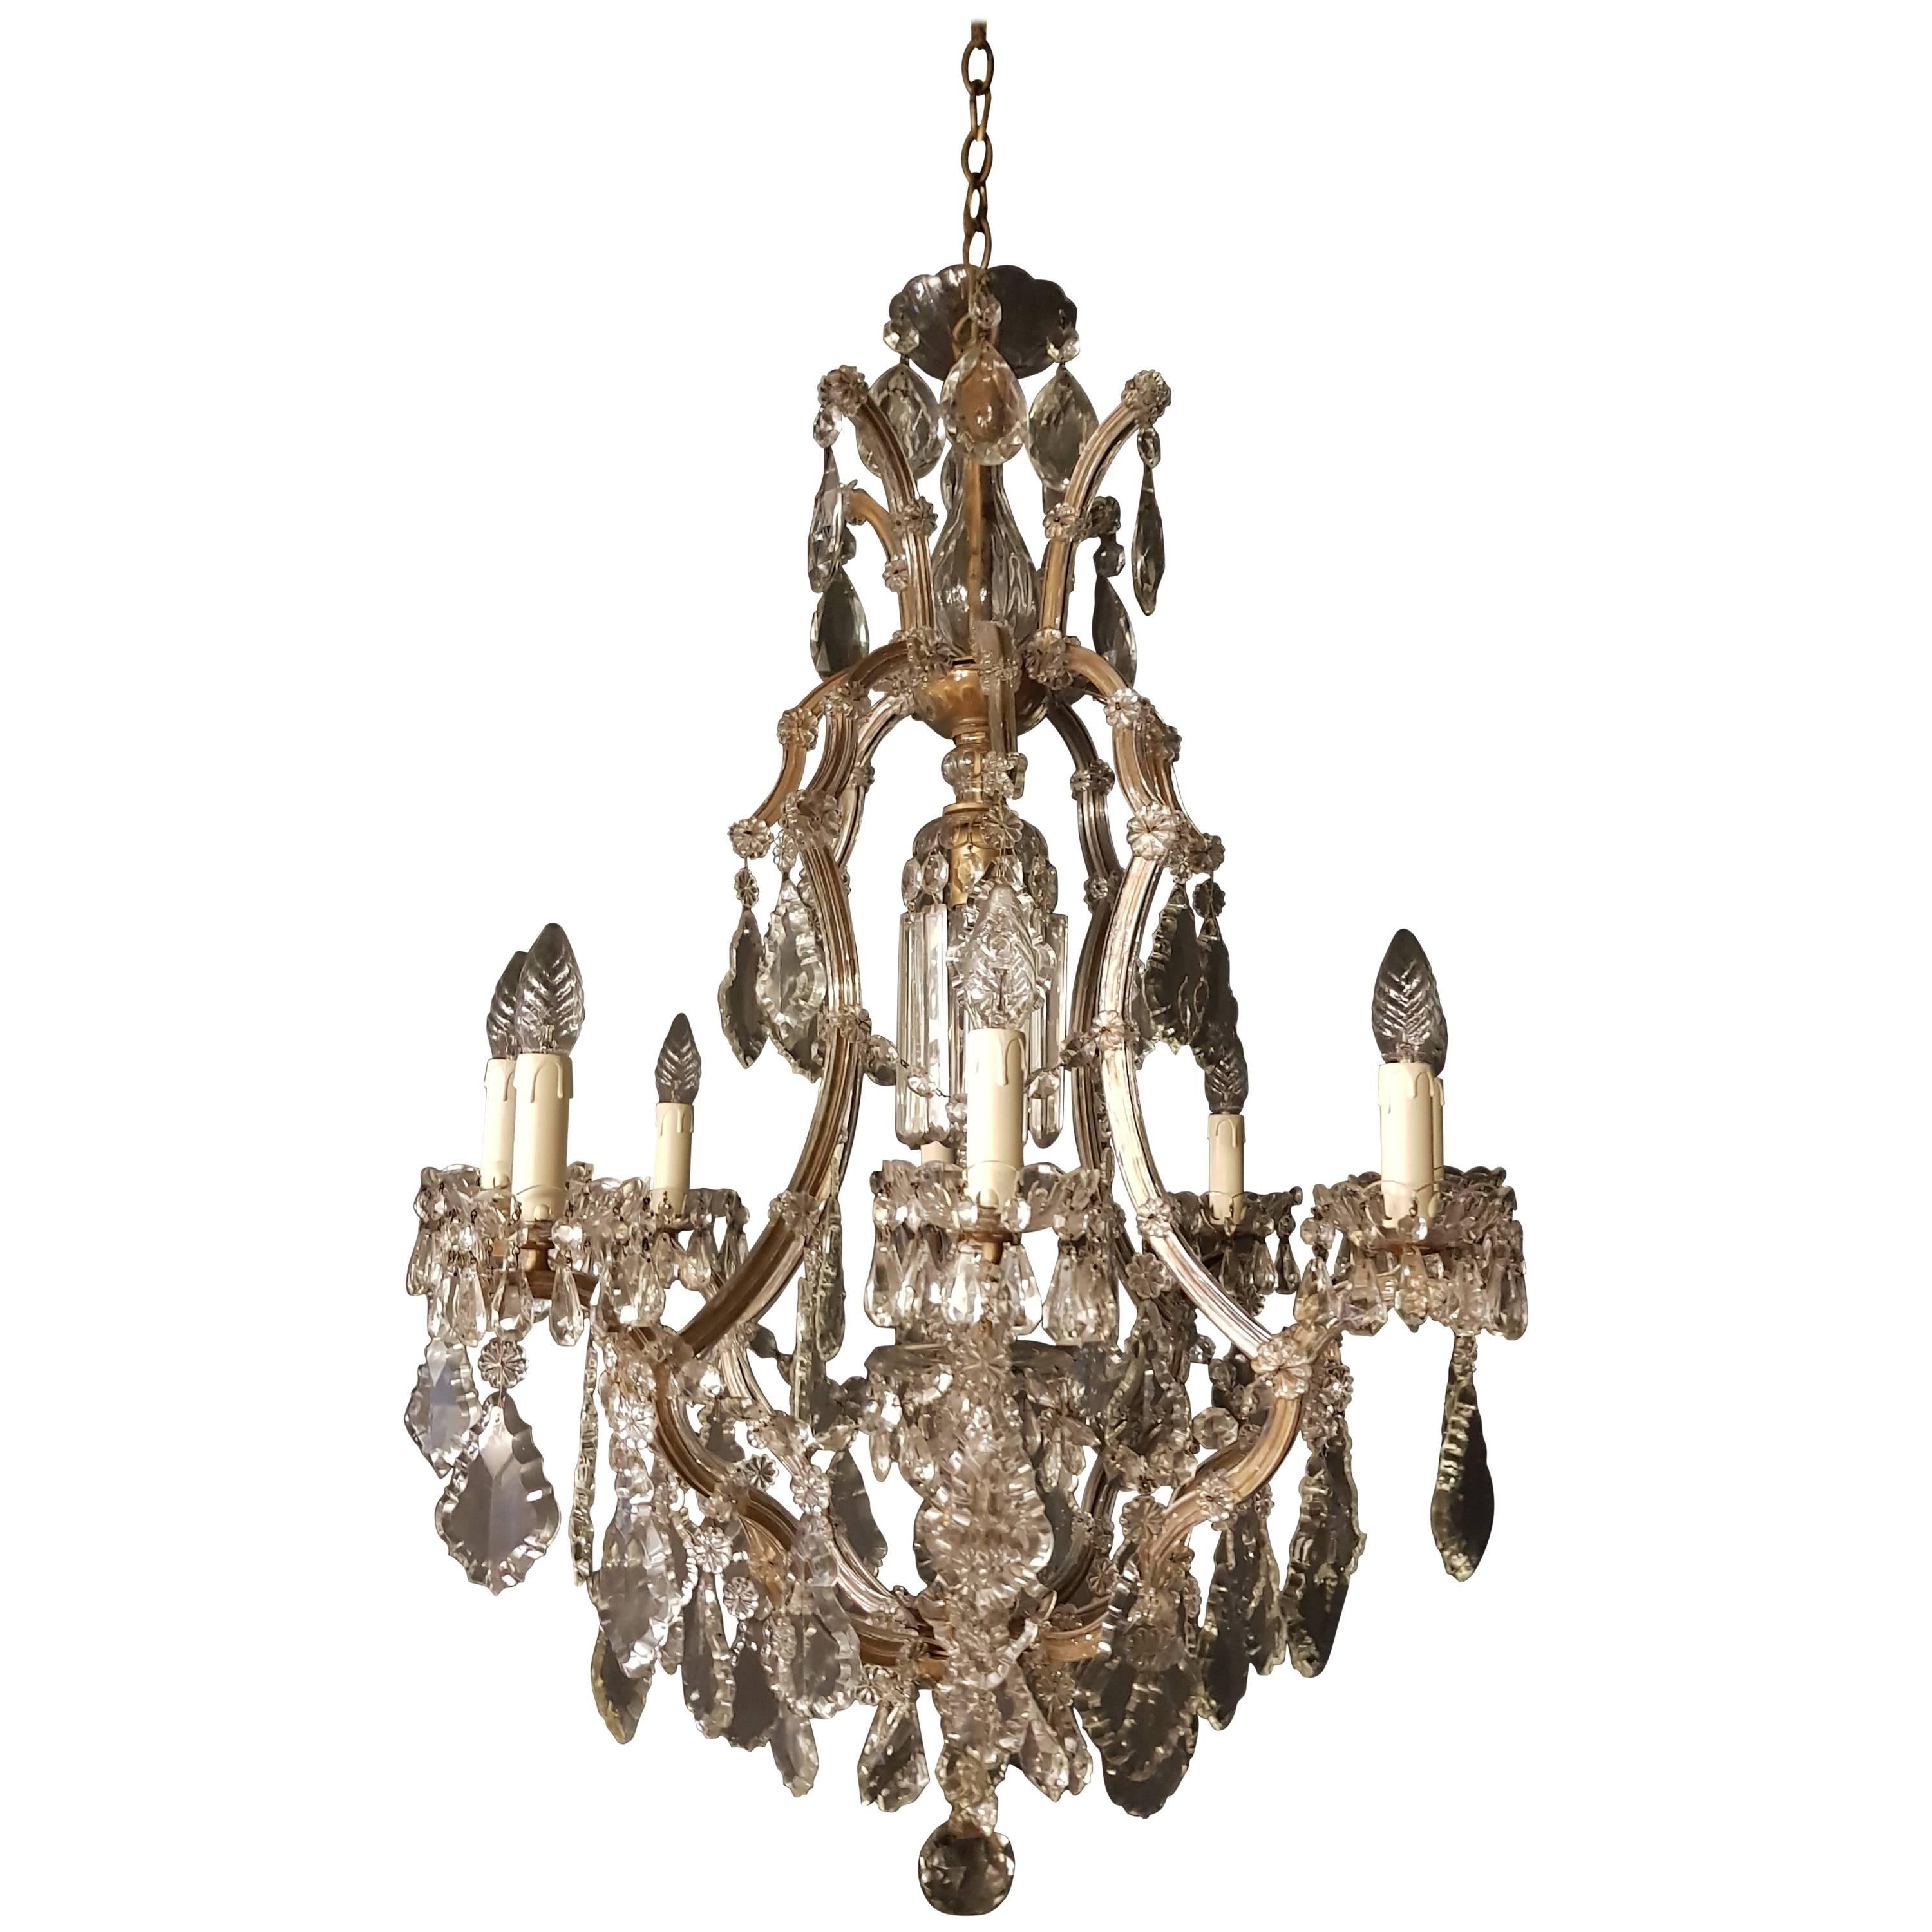 Maria Theresa Crystal Chandelier Antique Ceiling Lamp Lustre